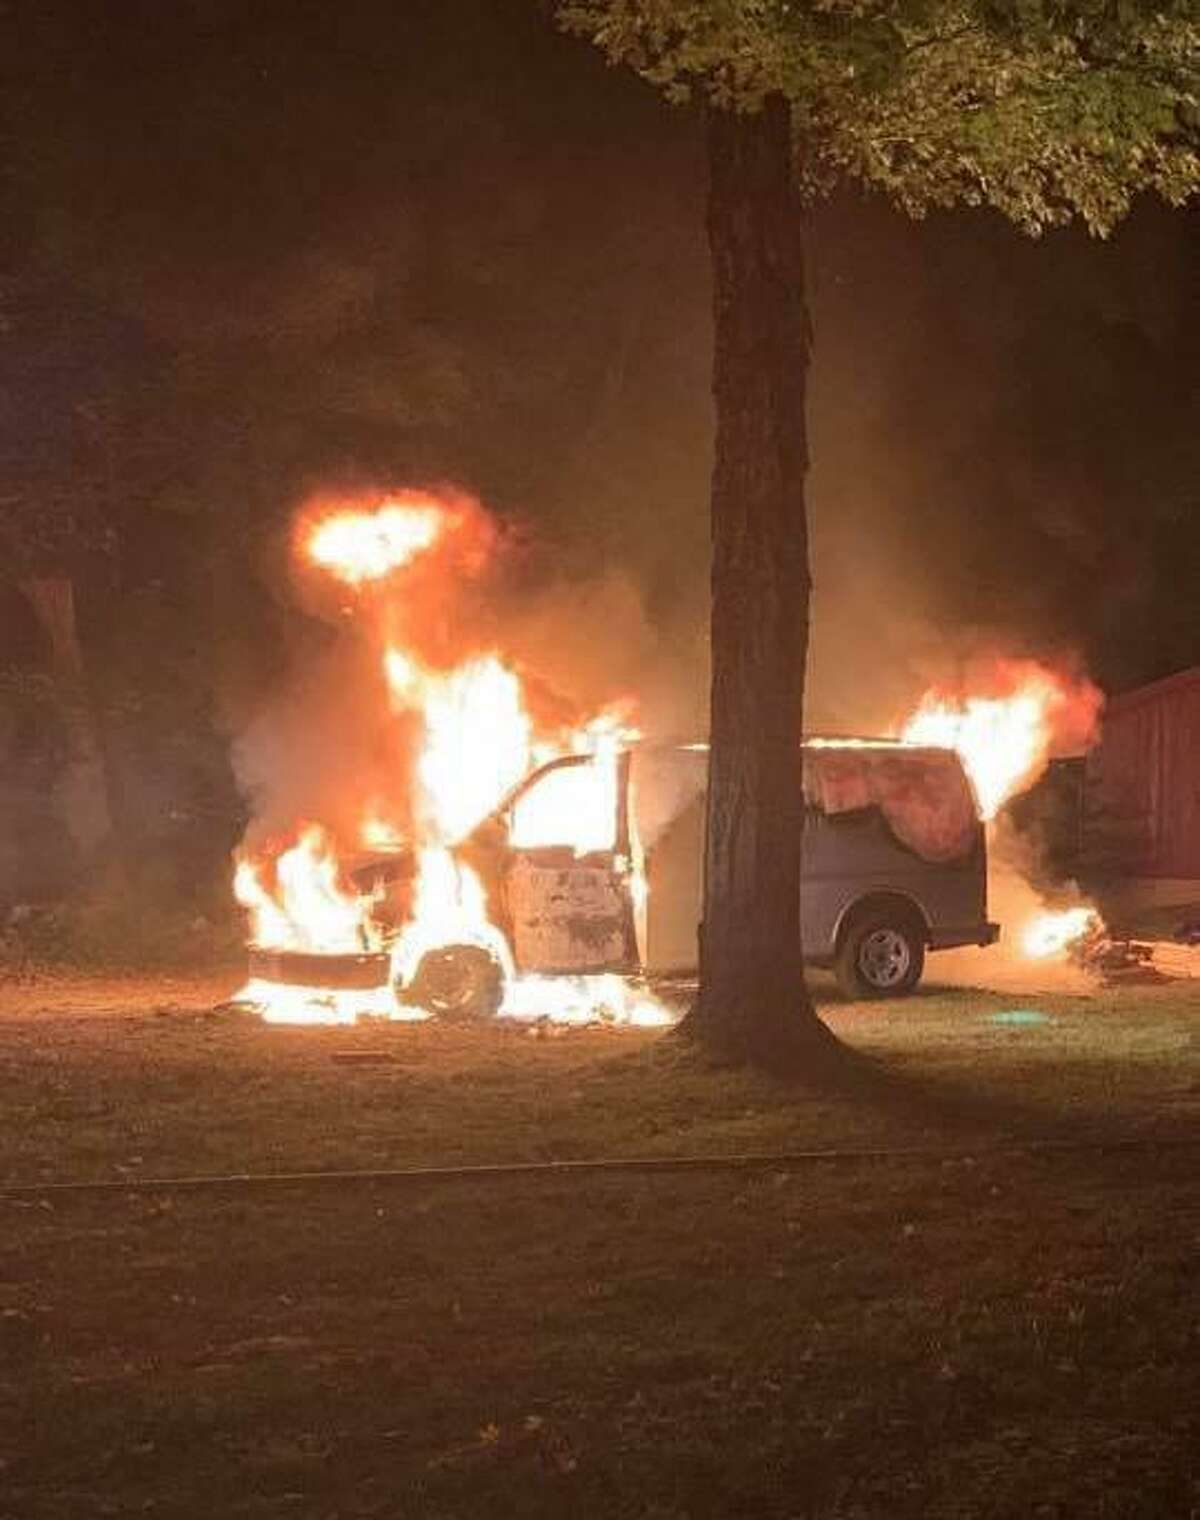 A van engulfed in flames outside a Main Street North residence Sept. 12, 2019.